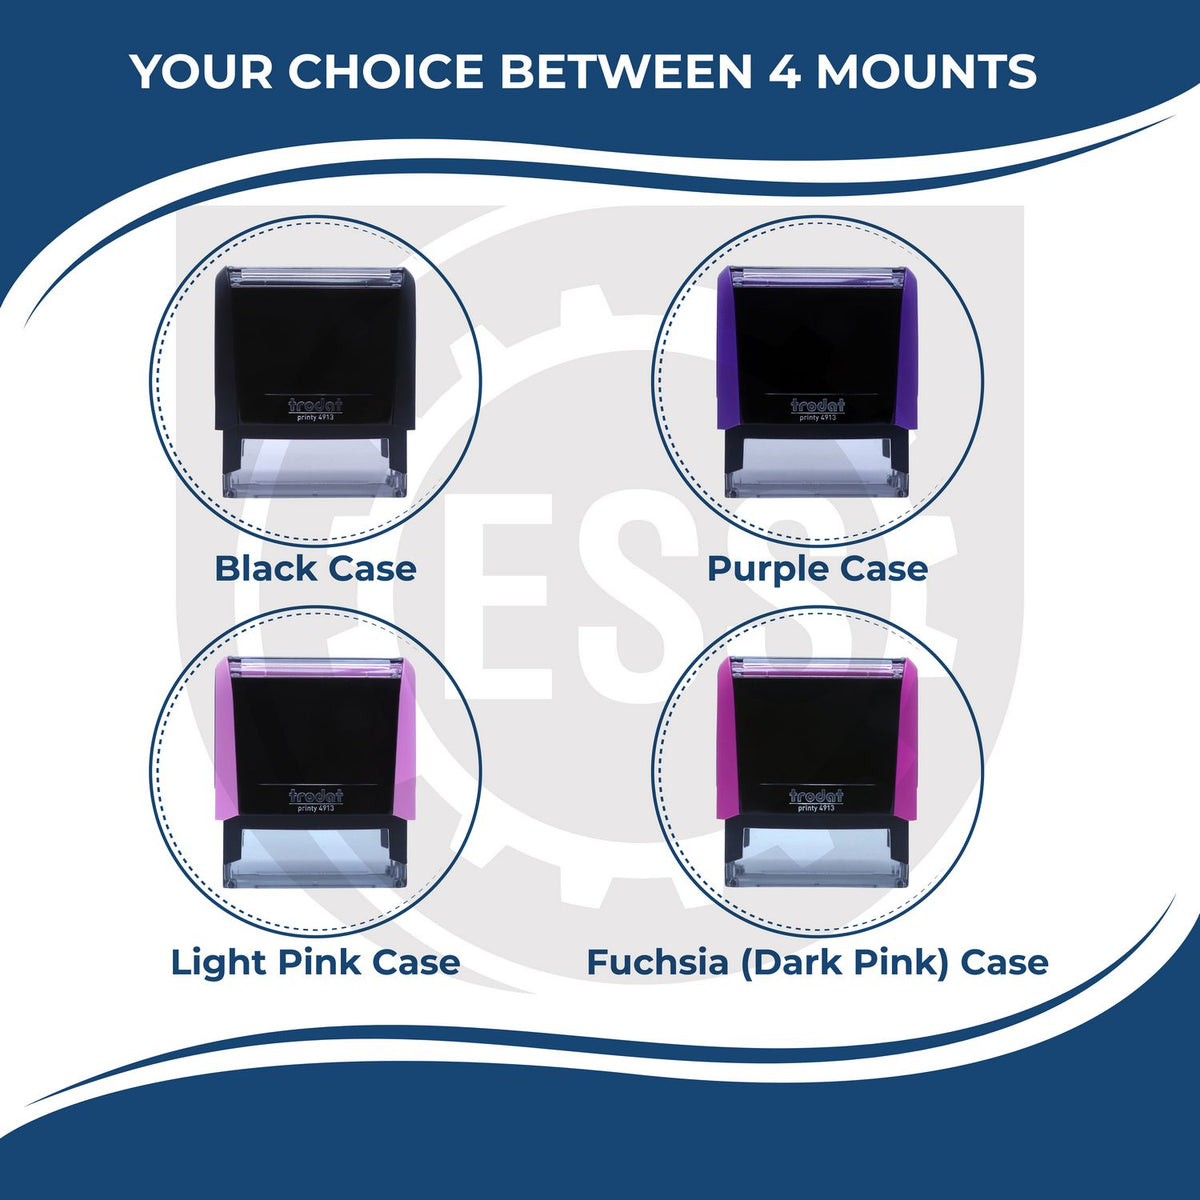 A picture of different colored mounts for the Self-Inking Rectangular Florida Notary Stamp featurning a Red, Blue or Black Mount